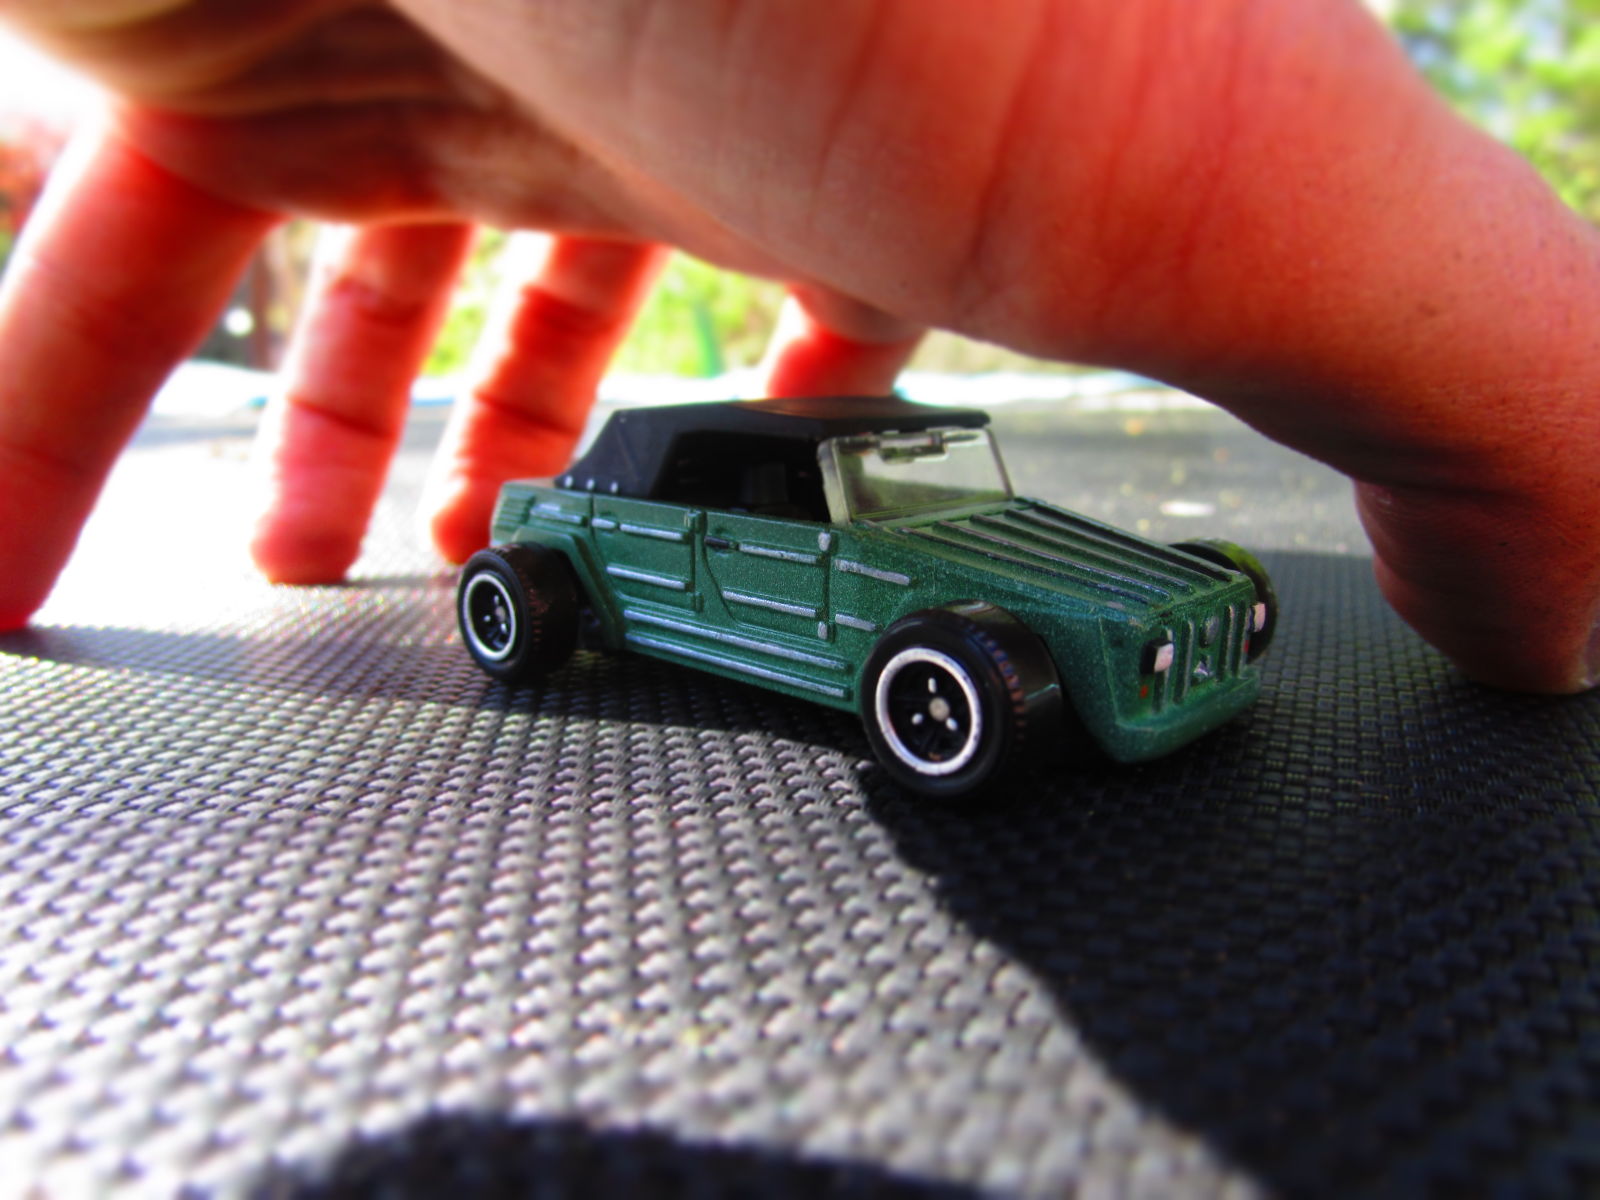 Illustration for article titled Its a Rod Thing: Custom Hotwheels